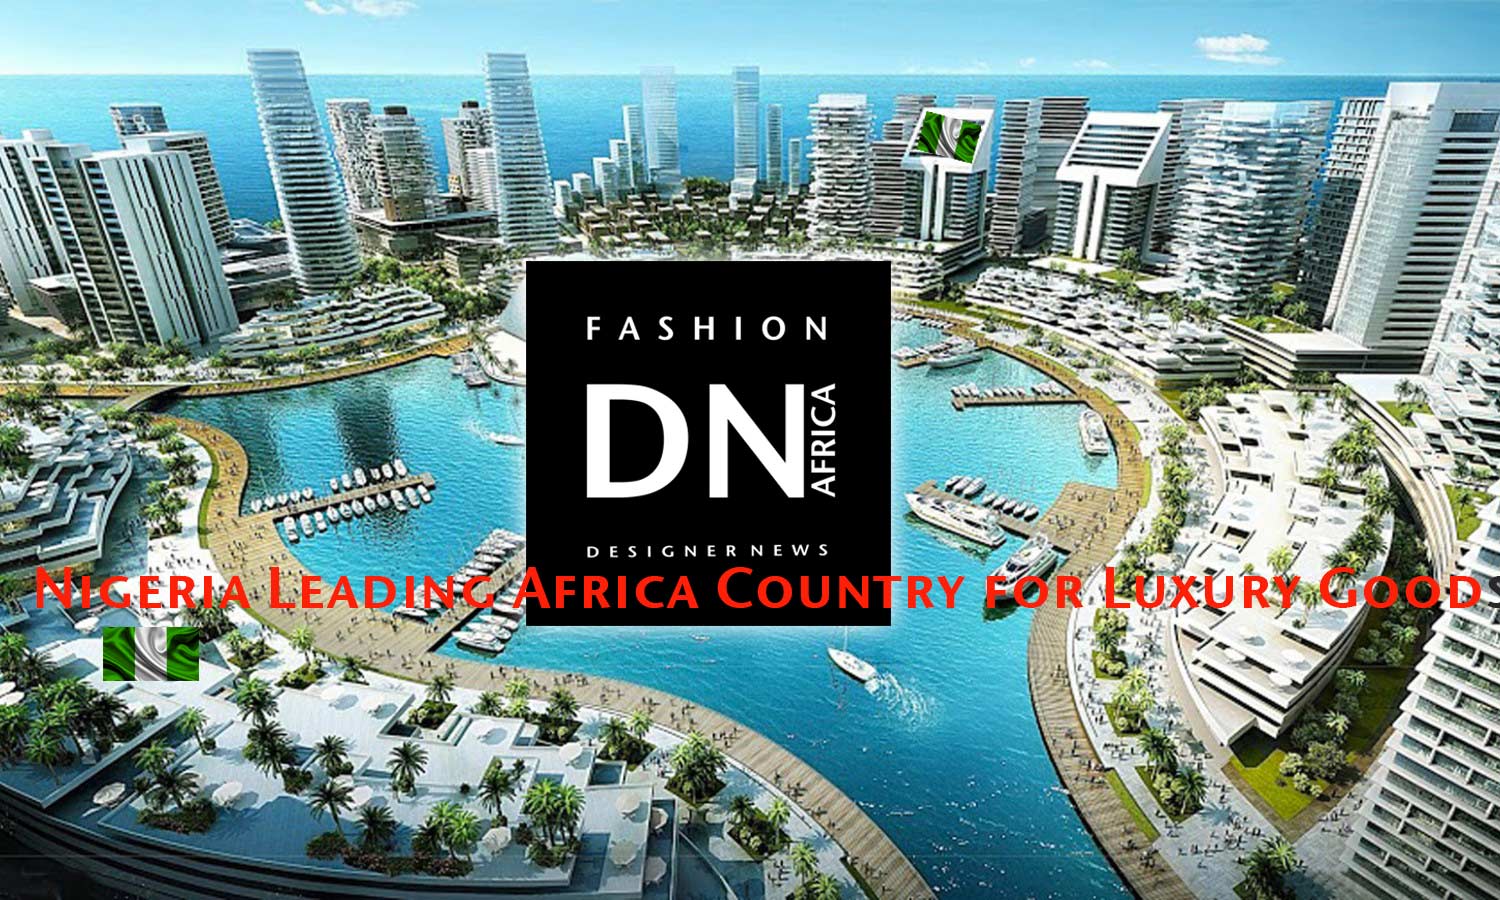 AFRICAN-FASHION-STYLE-MAGAZINE - Nigeria Leading Africa Country for Luxury Goods - DN-AFRICA-STUDIO-24-NIGERIA